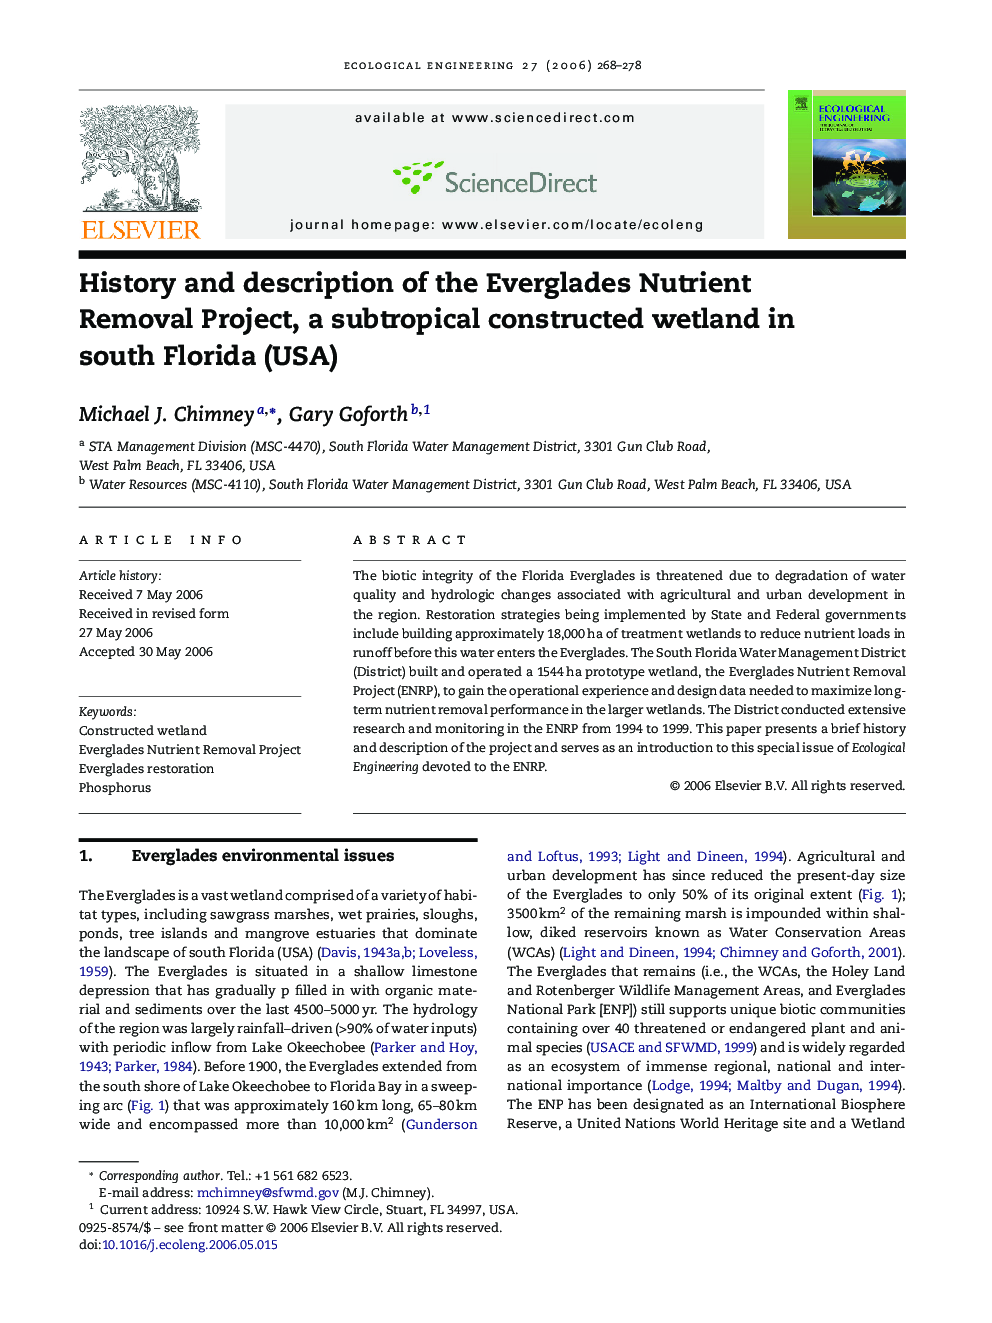 History and description of the Everglades Nutrient Removal Project, a subtropical constructed wetland in south Florida (USA)